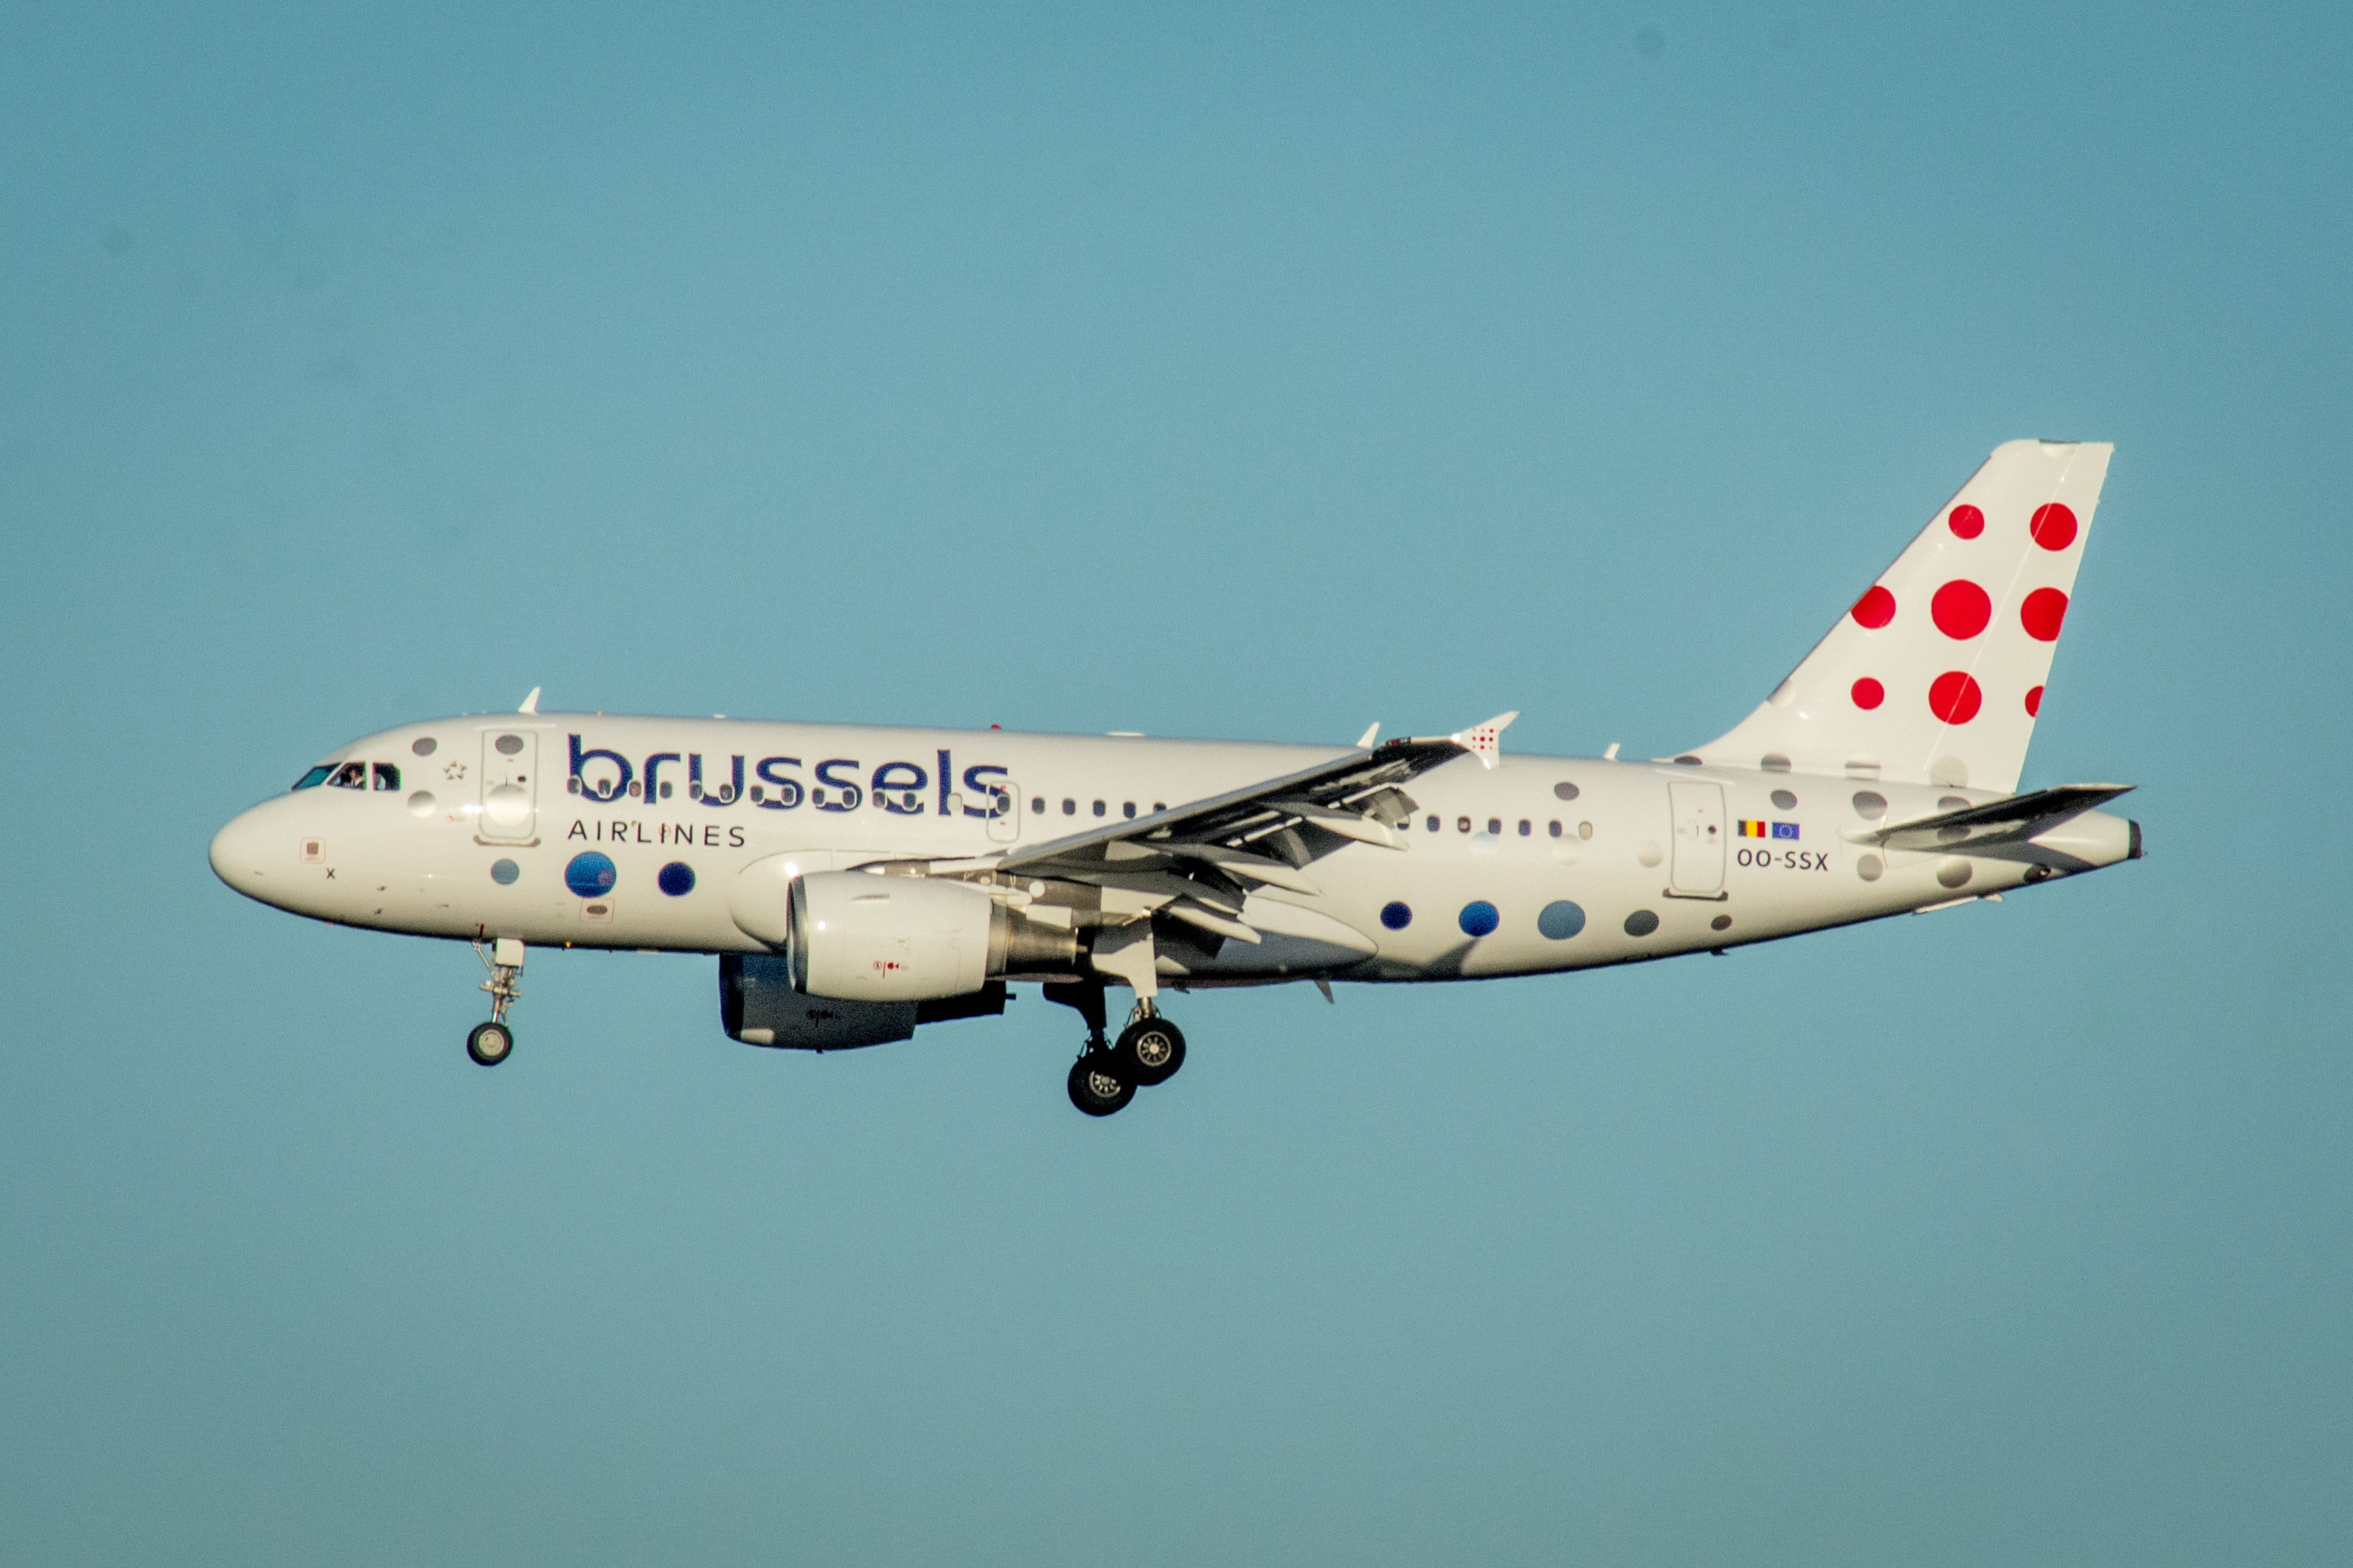 OO-SSX/OOSSX Brussels Airlines Airbus A319 Airframe Information - AVSpotters.com